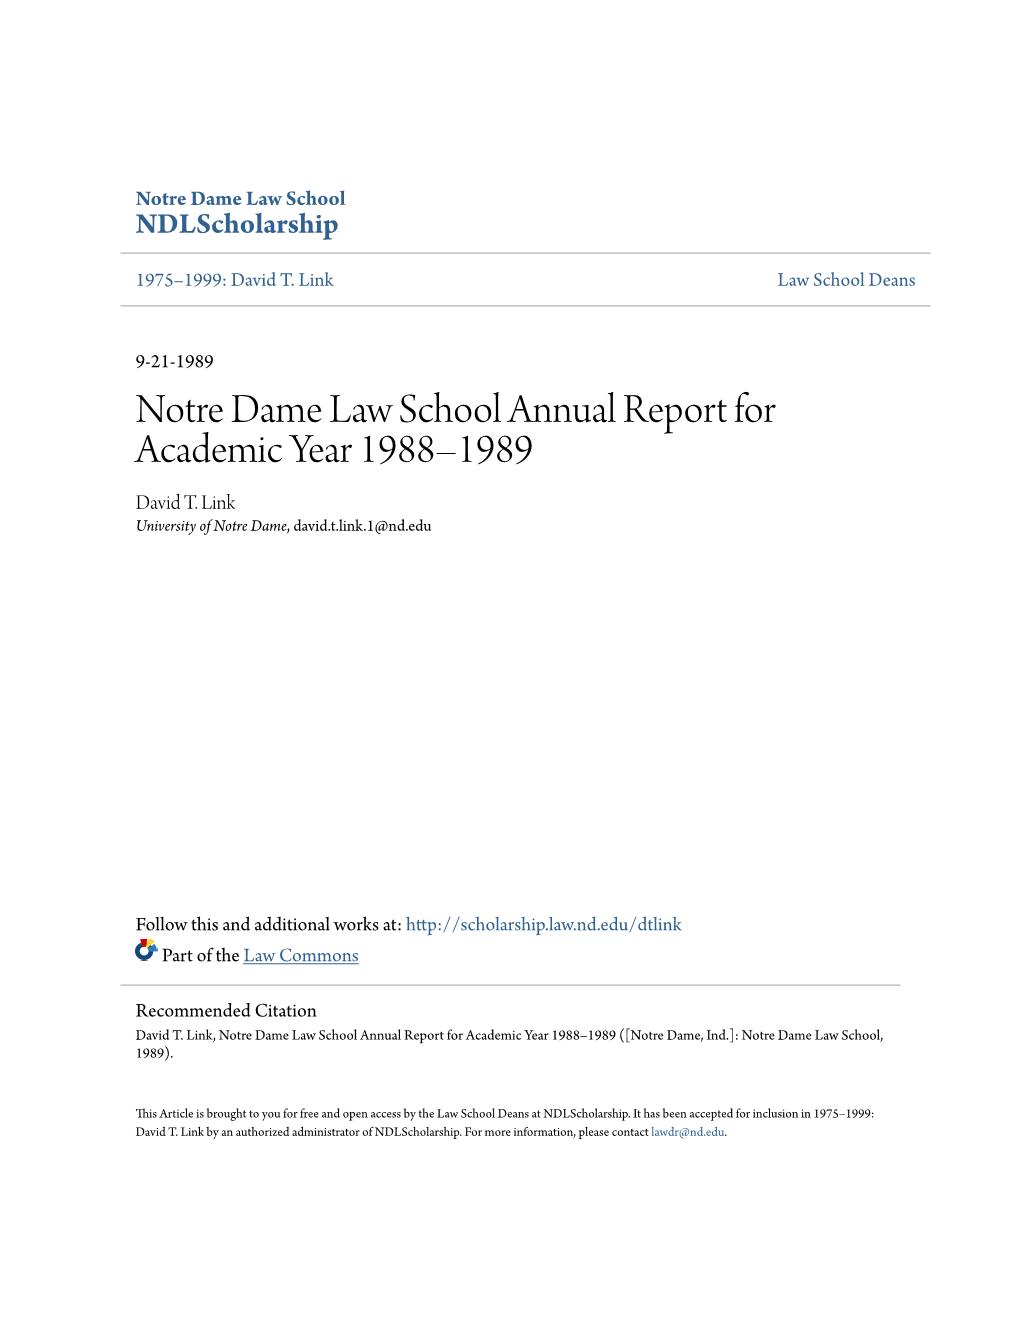 Notre Dame Law School Annual Report for Academic Year 1988Â